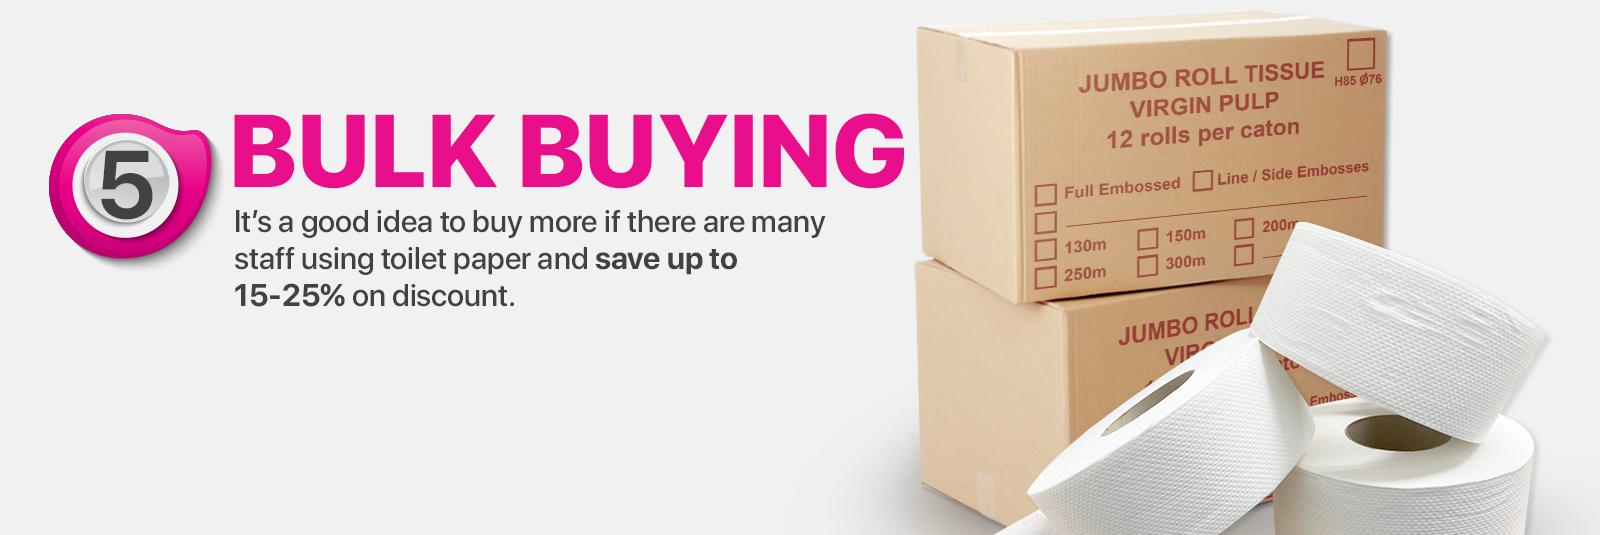 Bulk Buying - It's a good idea to buy more if there are many staff using toilet paper and save up to 15-25% on discount.